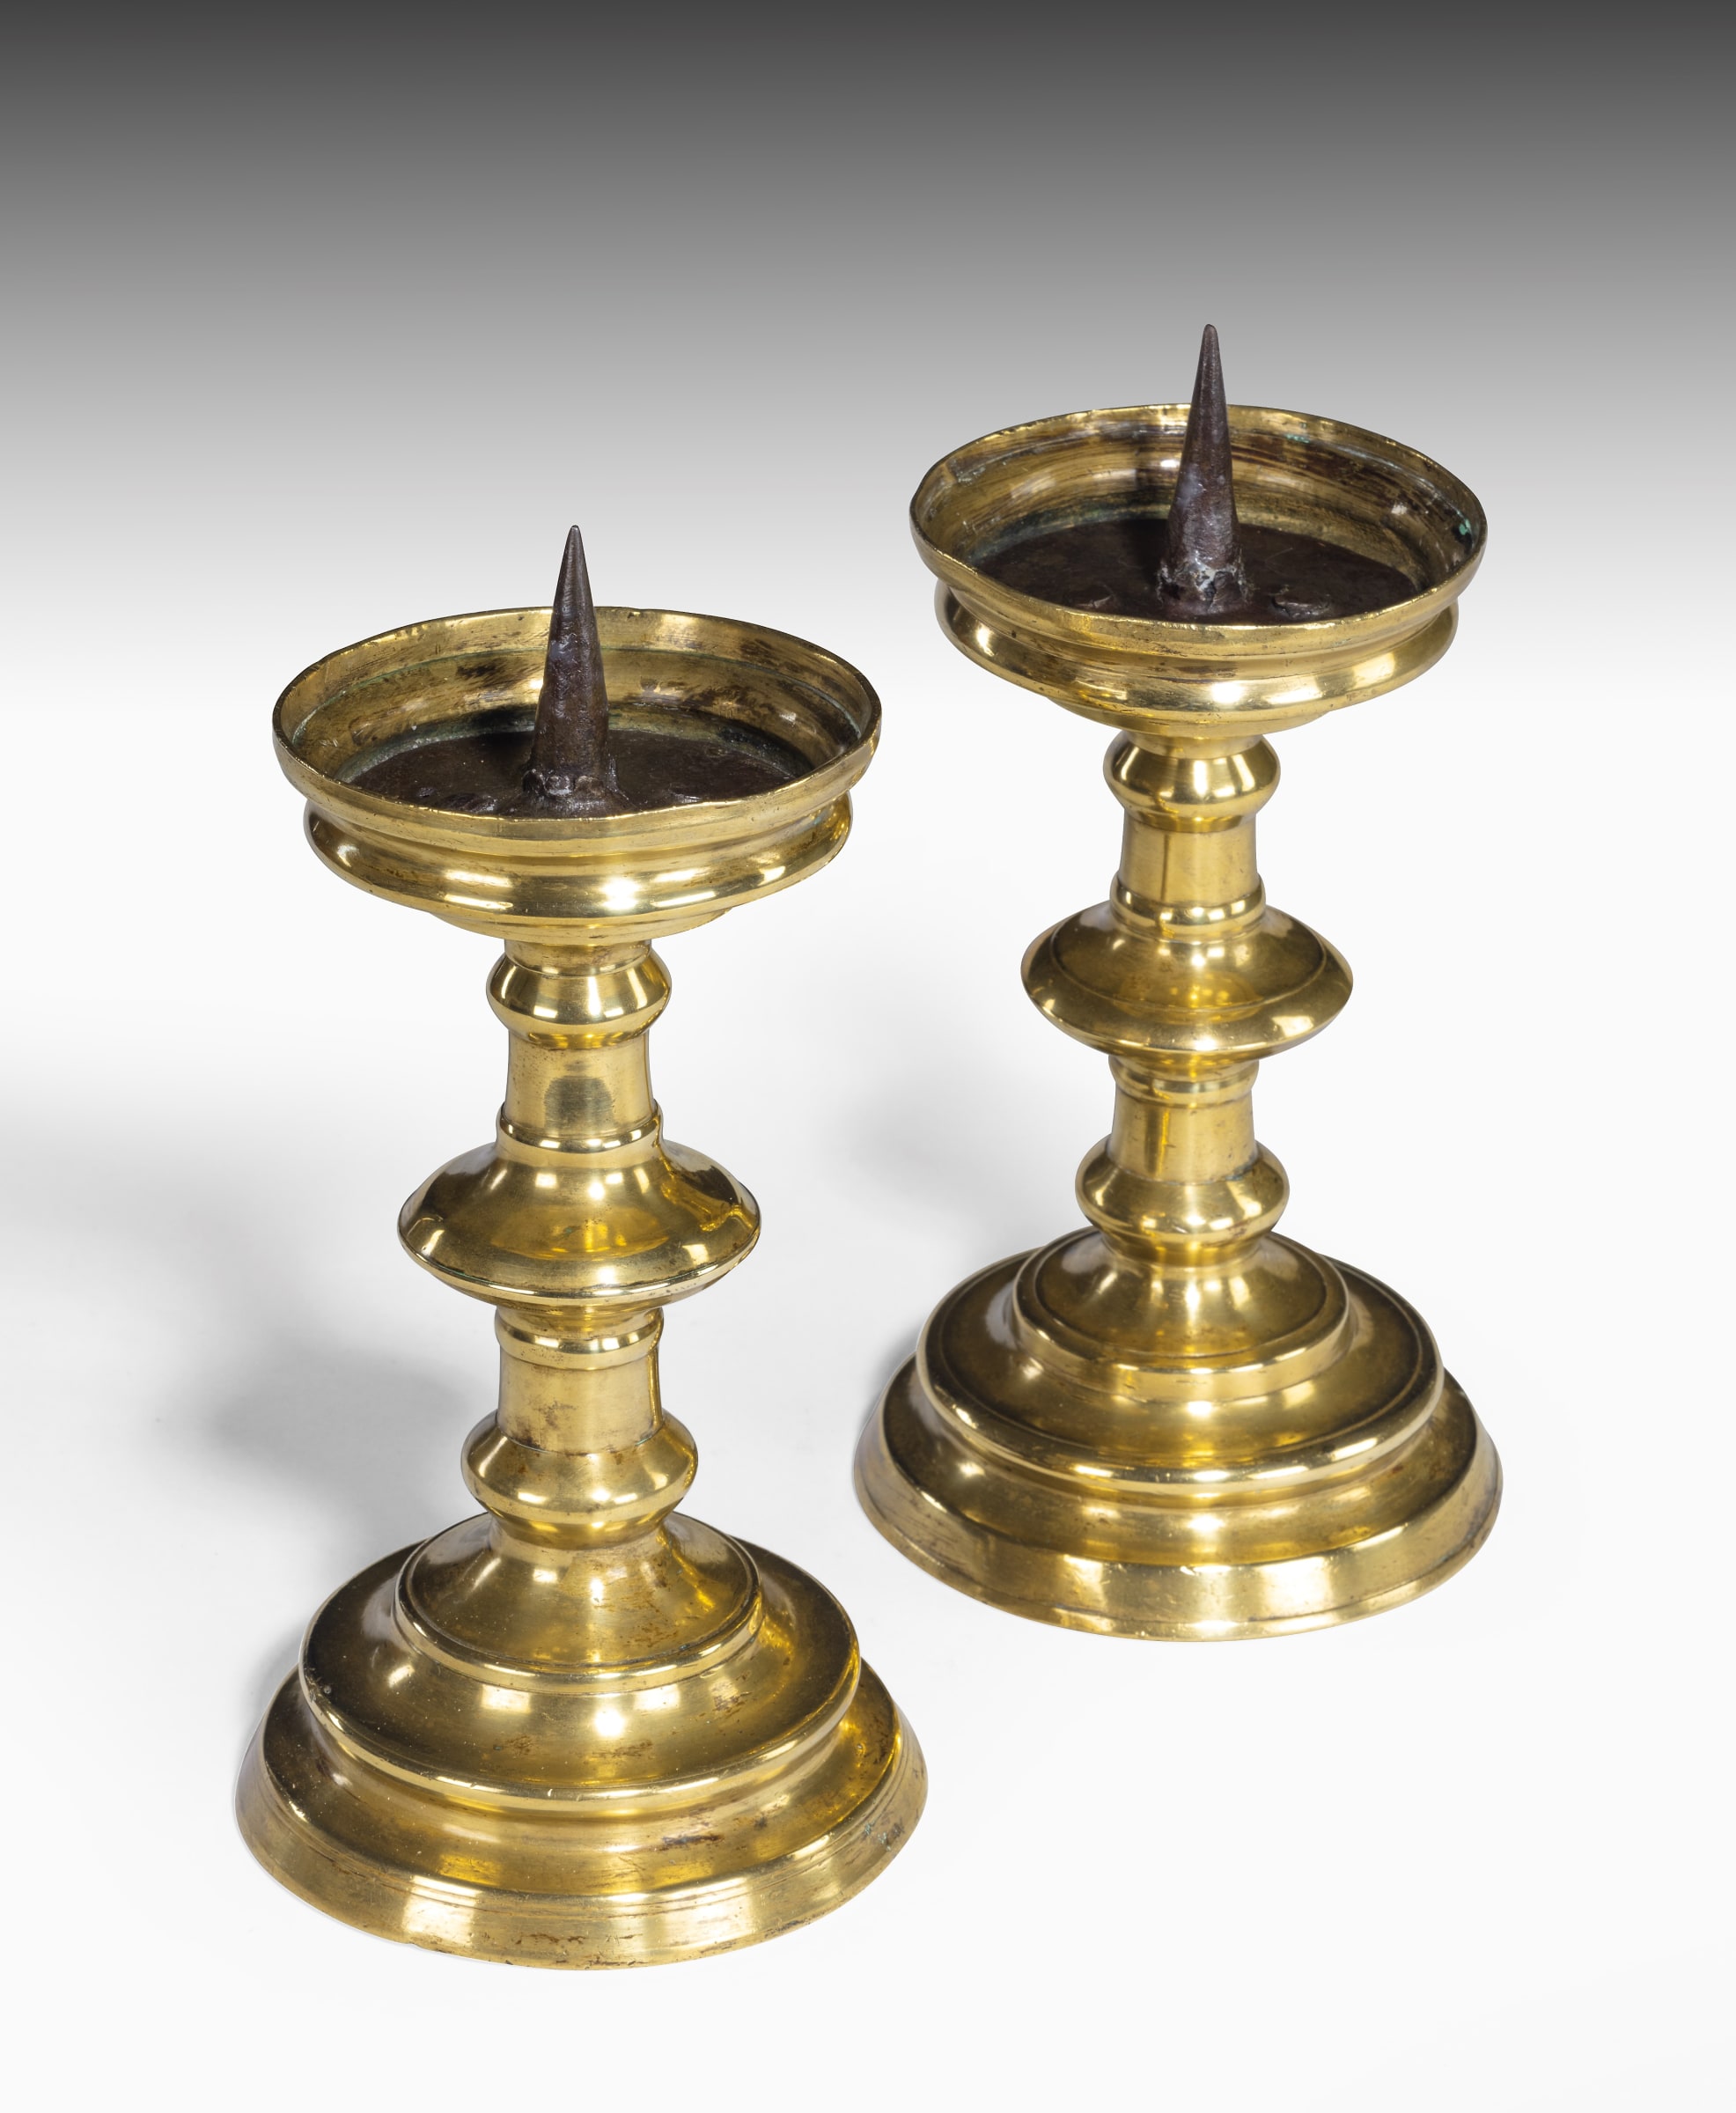 Pricket Candlestick, early 1500s. South Netherlands, Valley of the Meuse,  16th century. Brass (hollow cast in three parts) and iron; overall: 45.5 x  19.6 cm (17 15/16 x 7 - Album alb4231791